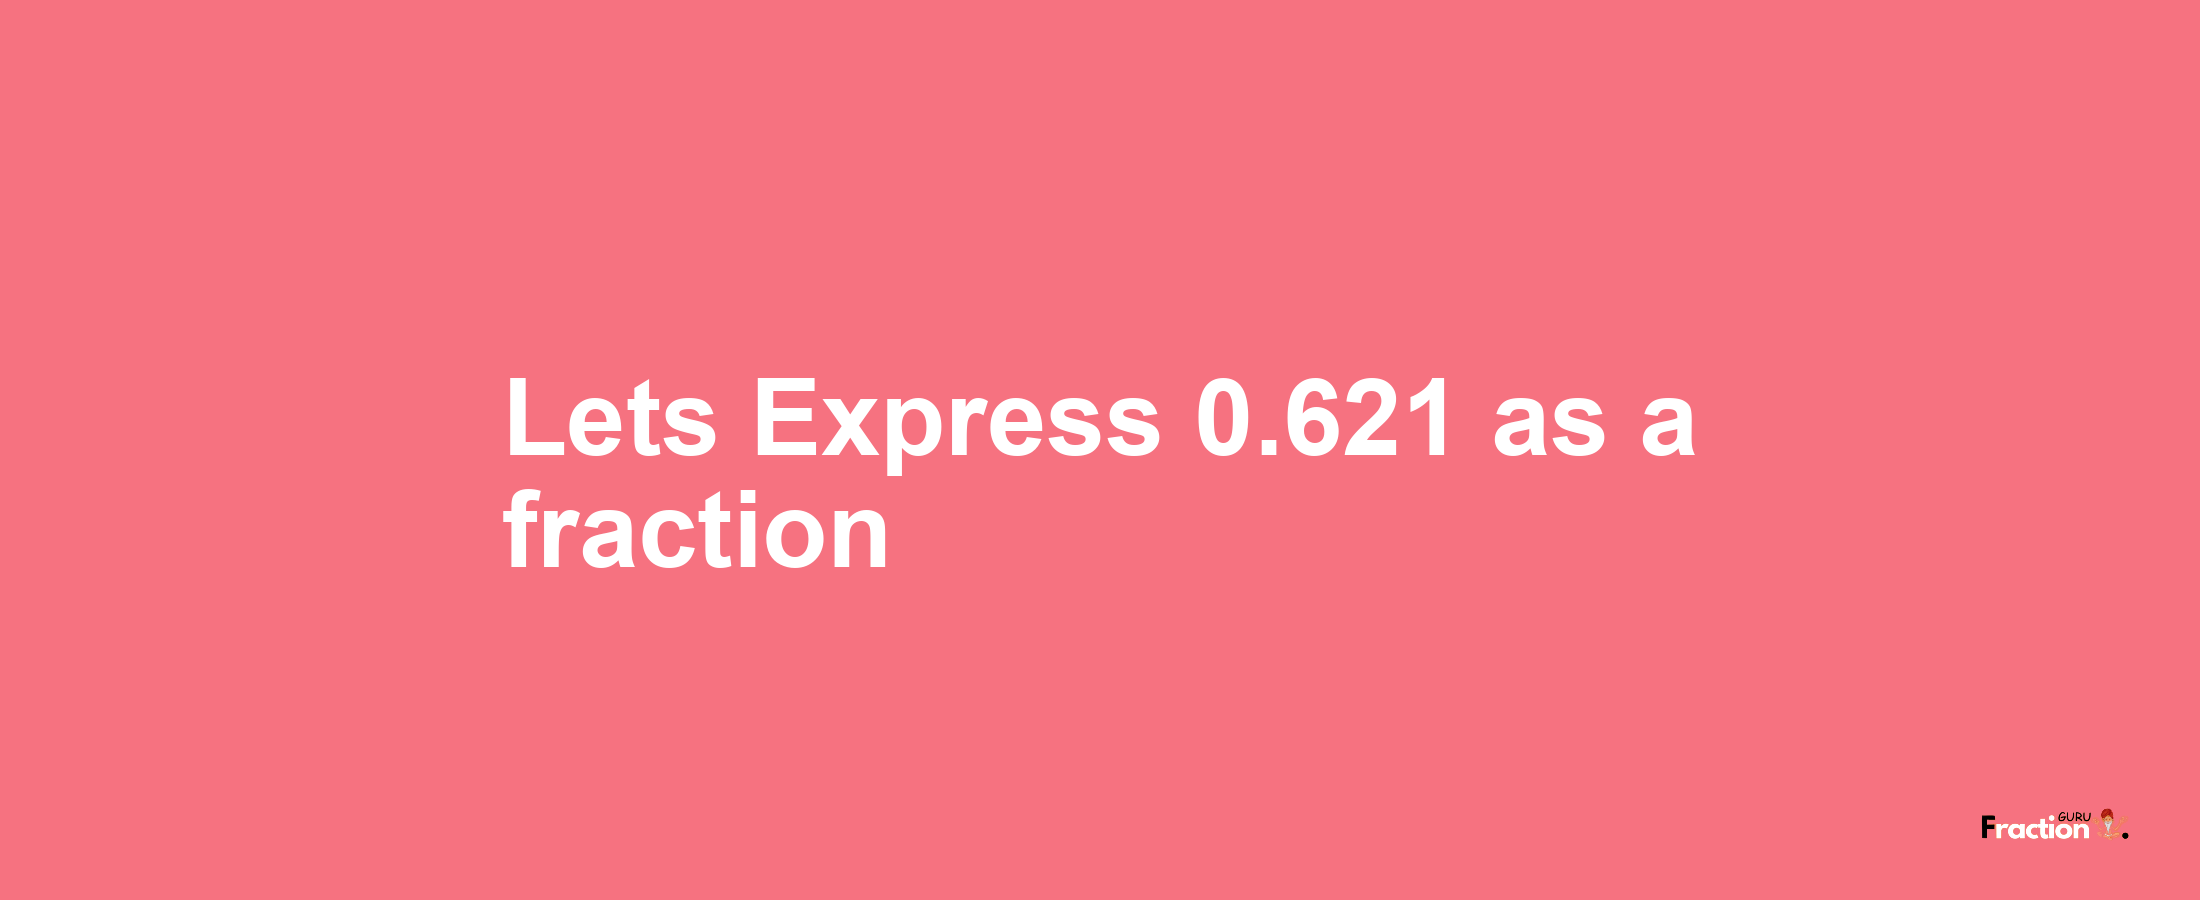 Lets Express 0.621 as afraction